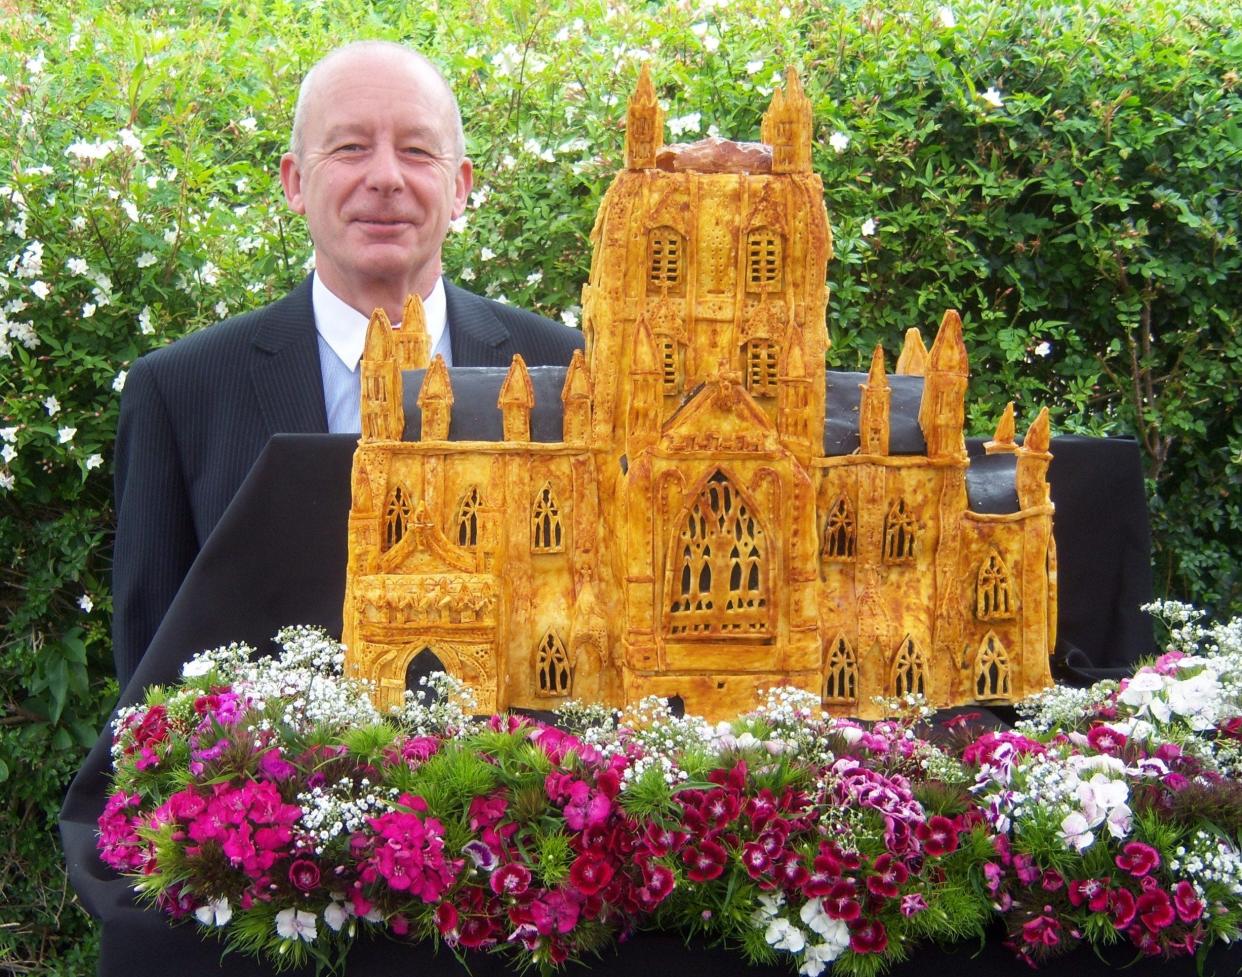 English  journalist Martin Kirby is shown in 2012 with the Queen's Jubilee lamprey pie, shaped to resemble Gloucester Cathedral, and made of Great Lakes lampreys shipped from Michigan. Although despised by Michigan anglers, lampreys are prized in England and another pie is likely to be baked for the new monarch, King Charles III, said a spokesman for the Great Lakes Fishery Commission in Ann Arbor.